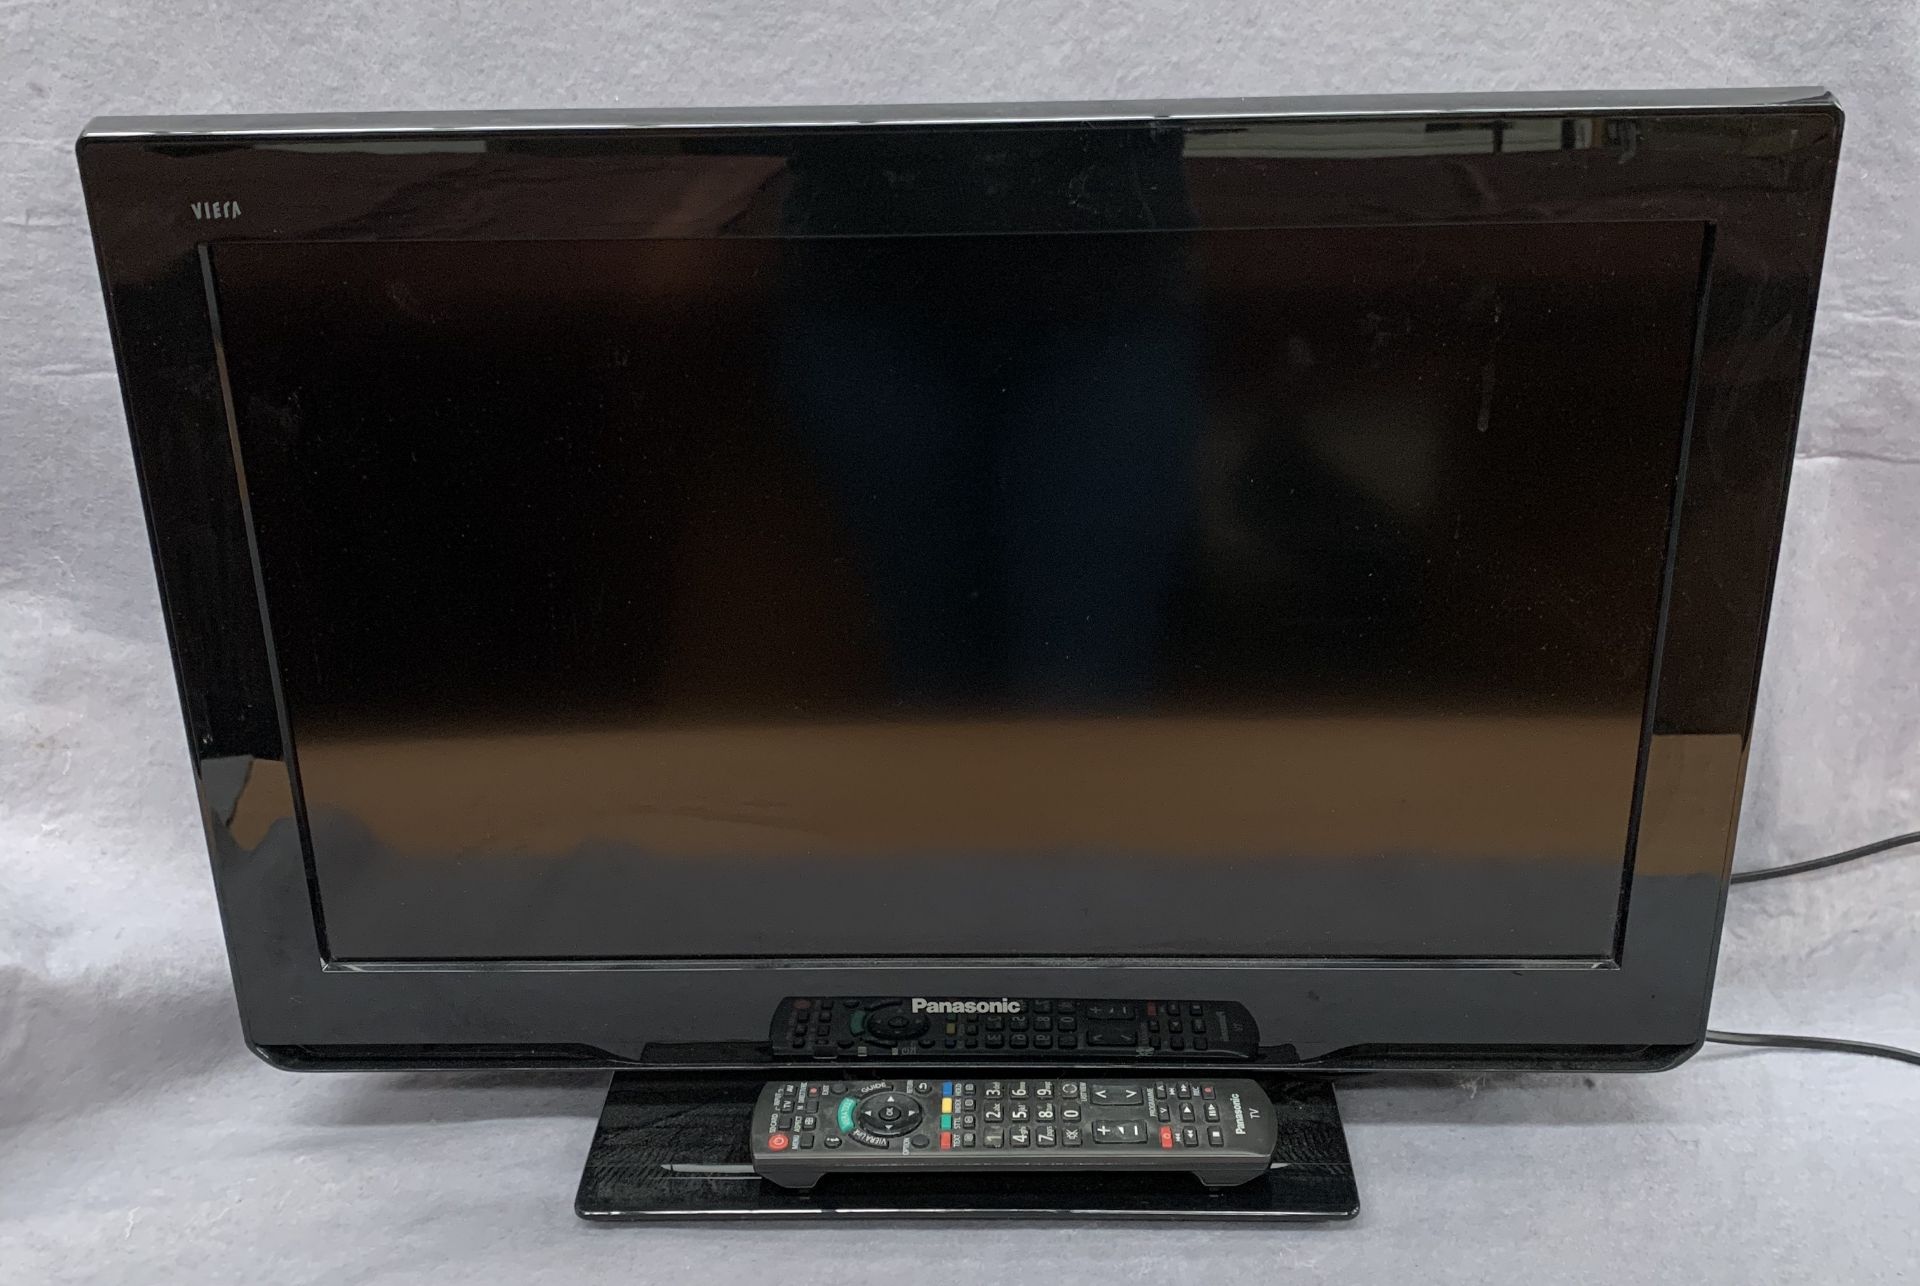 A Panasonic Viera TX-L24C3B LCD TV complete with remote control